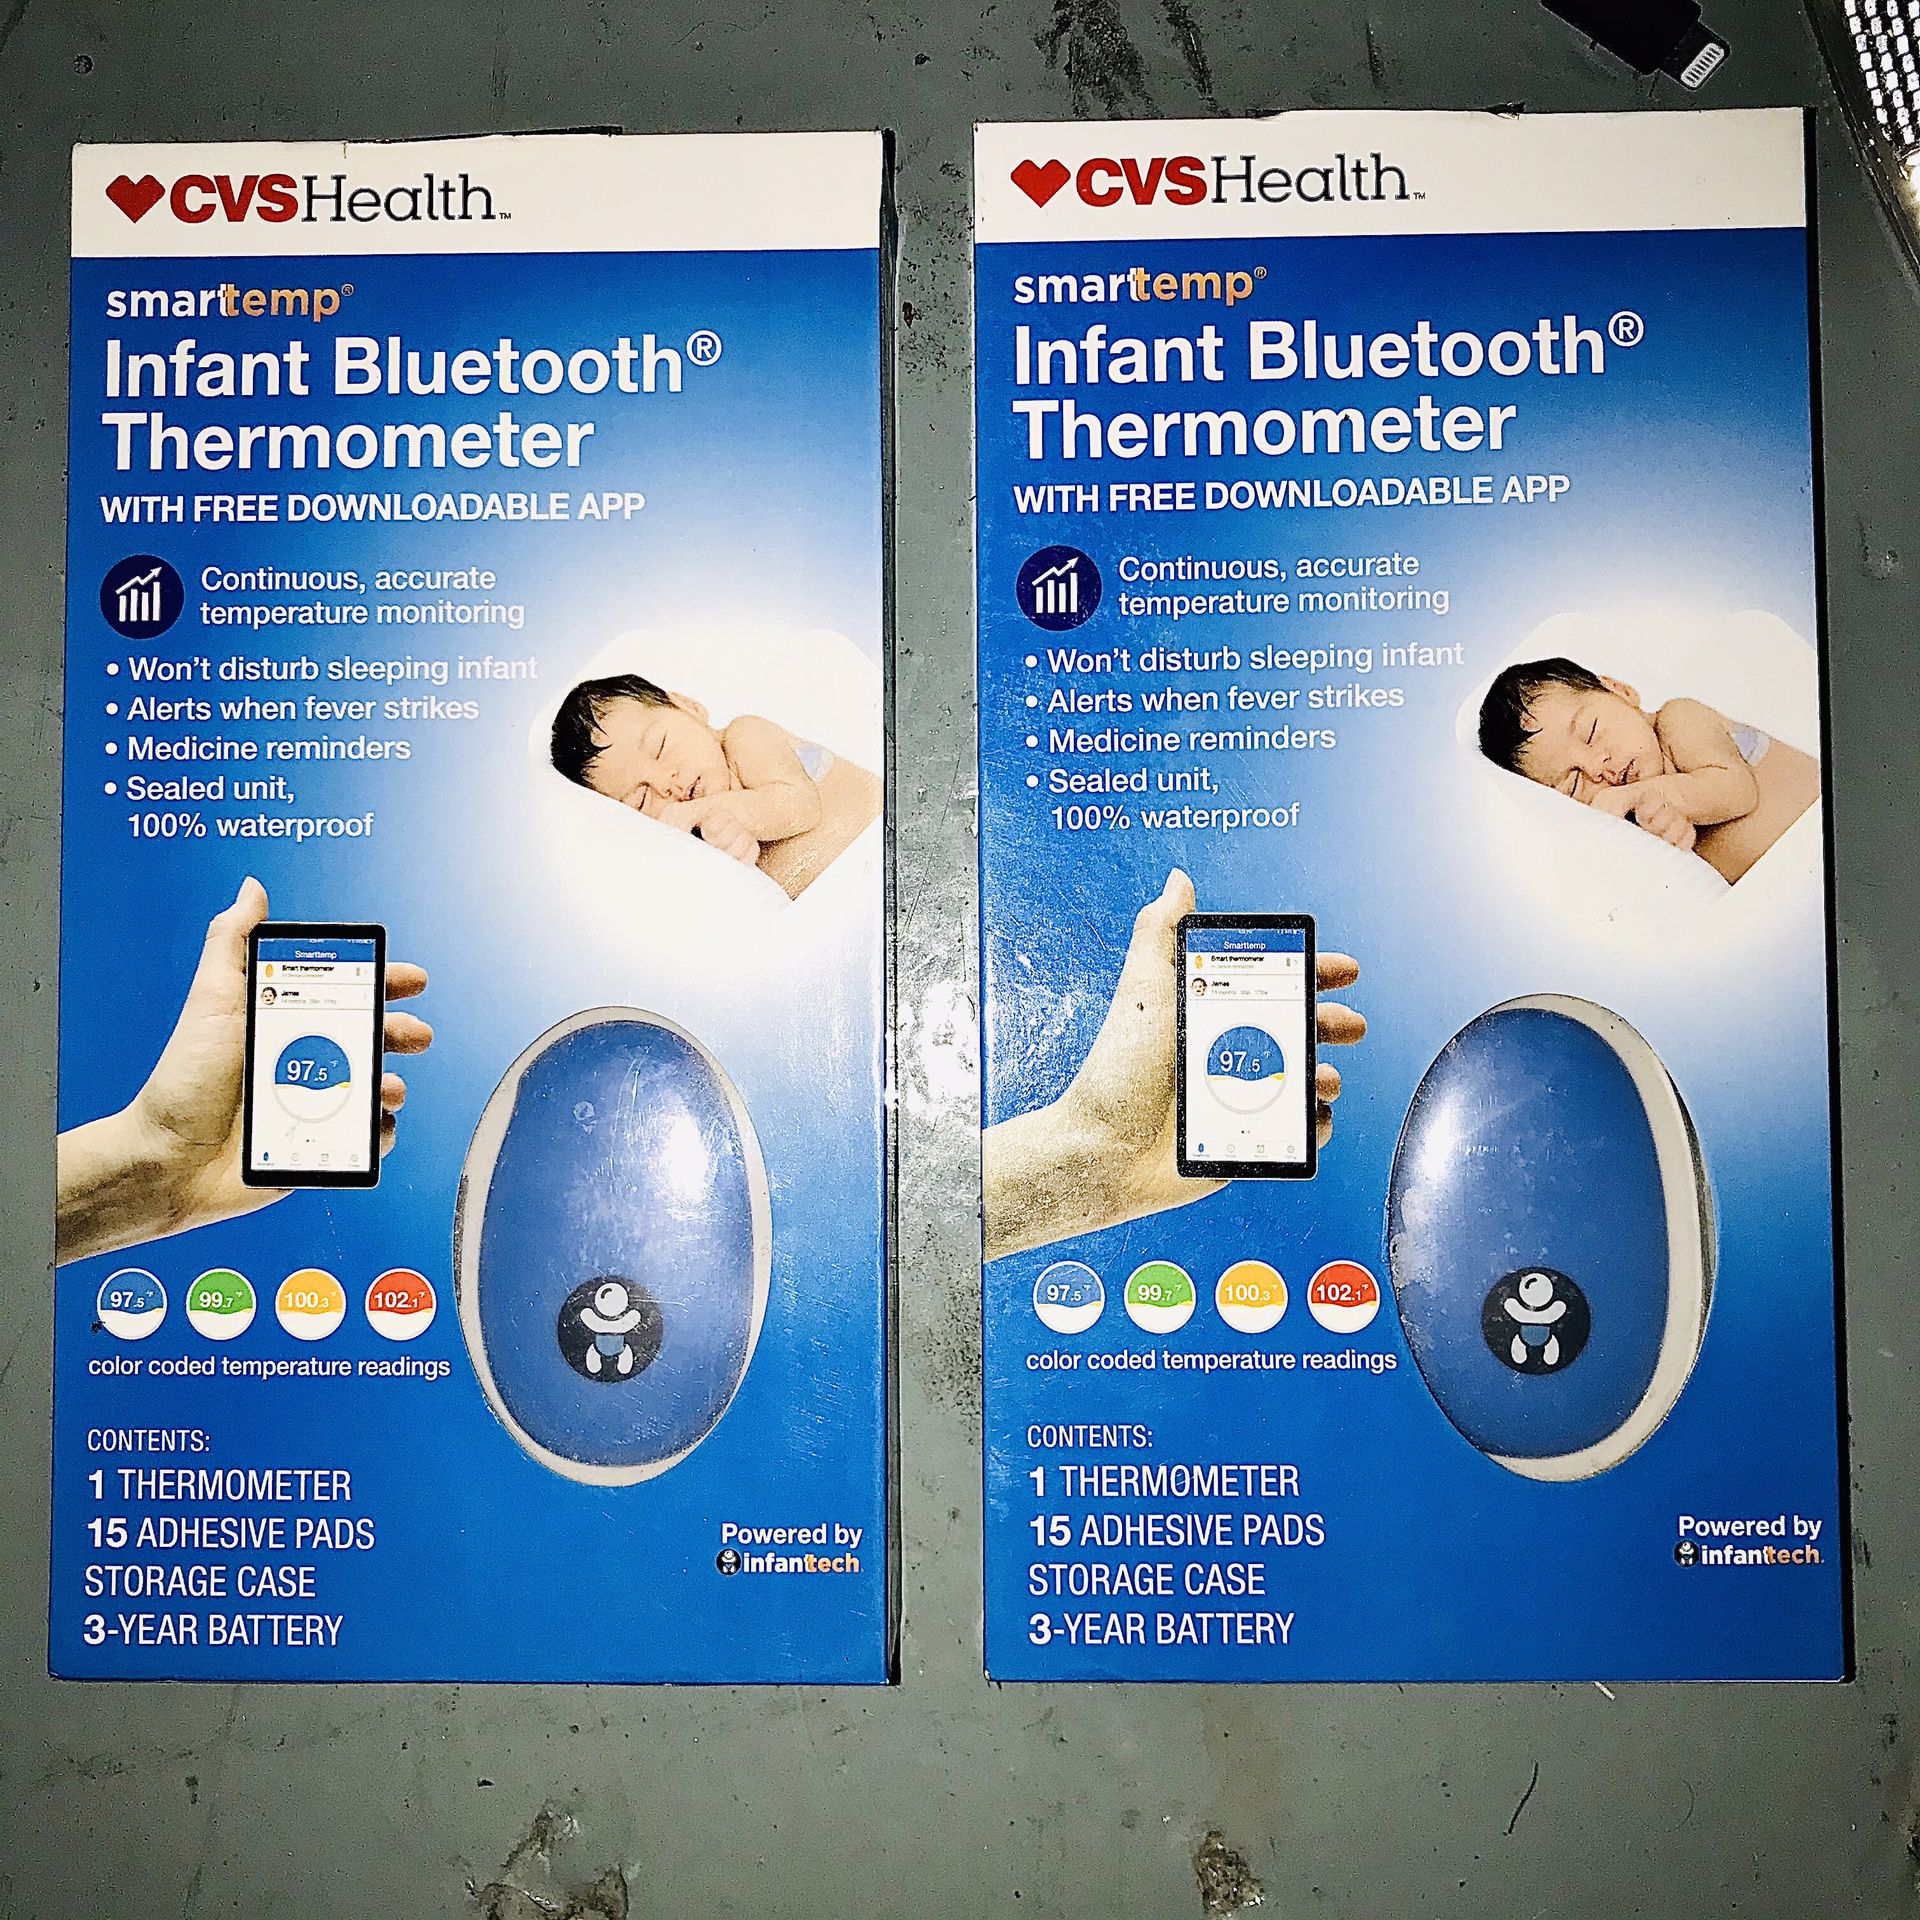 Infant BluTooth Thermometers (2 SmartTemp Thermometers)